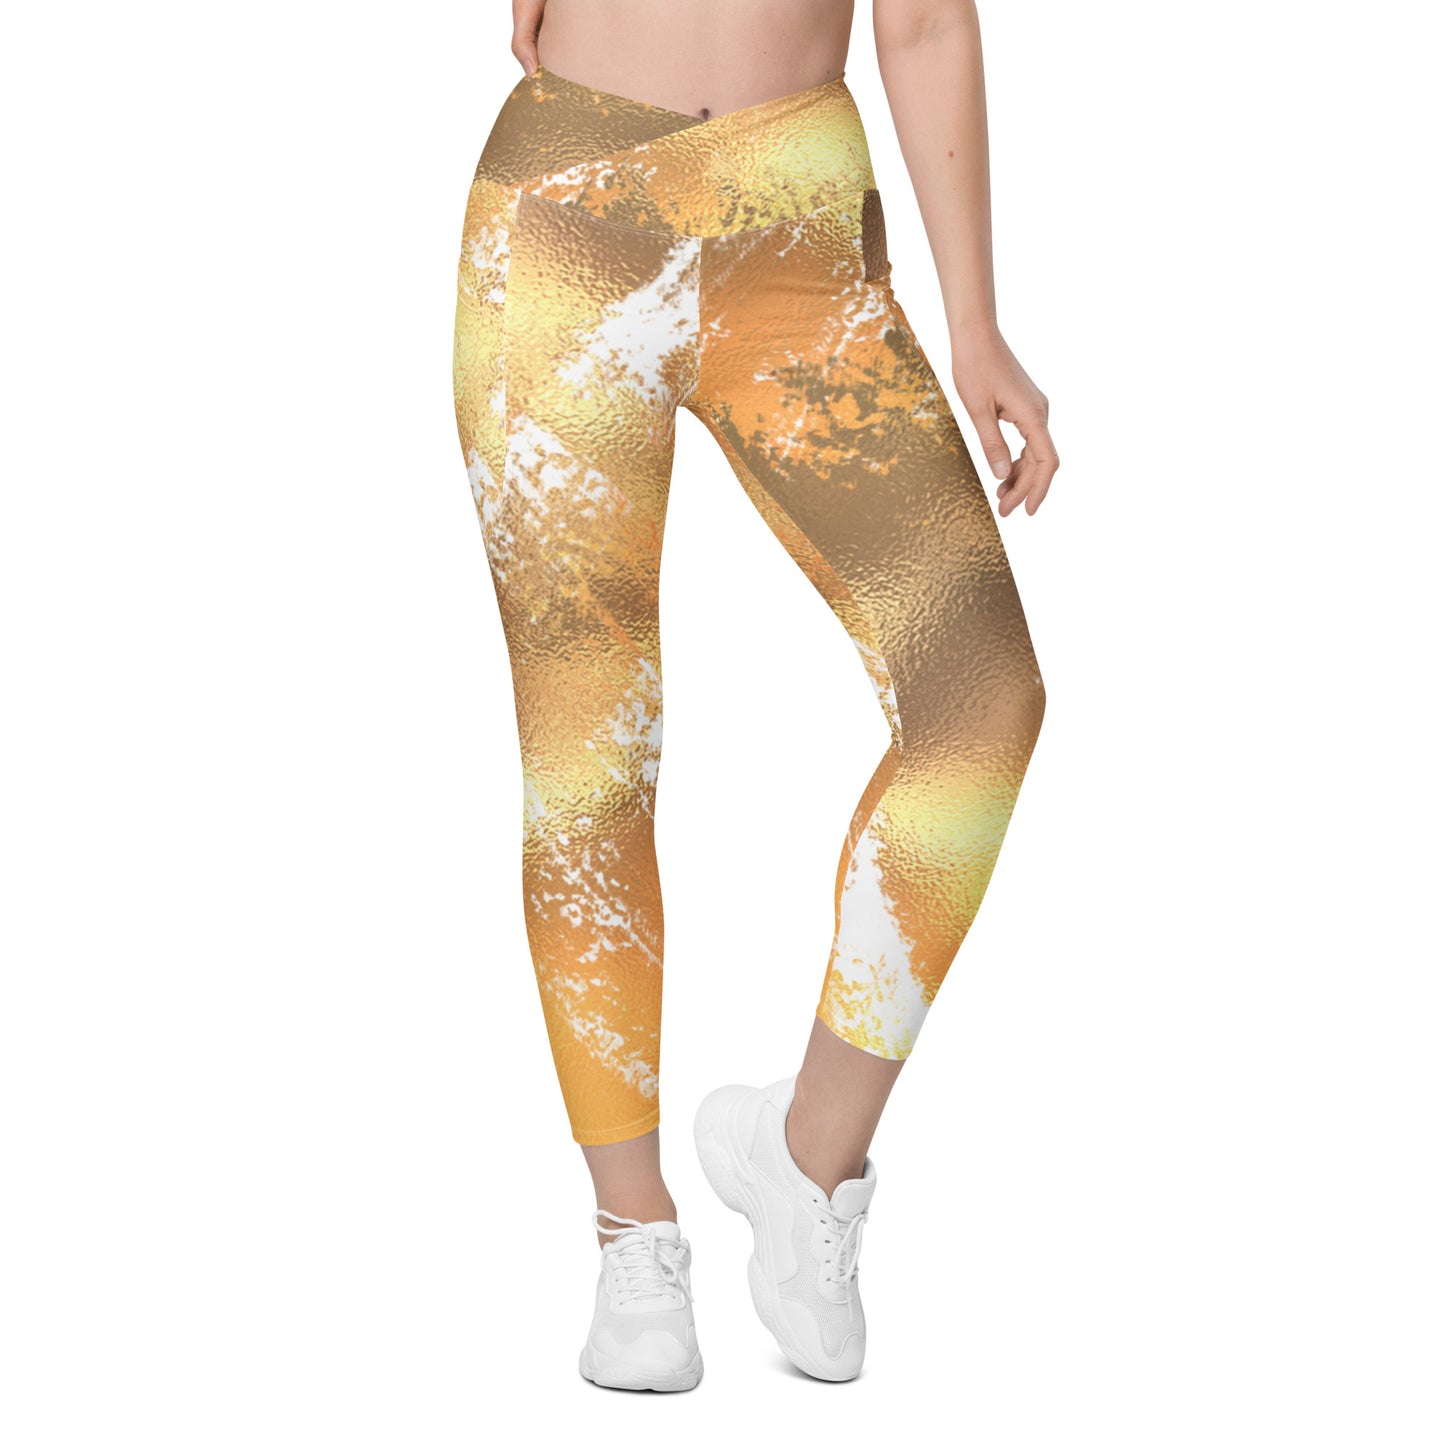 Crossover leggings with pockets flattering crossover leggings- Gold Collection